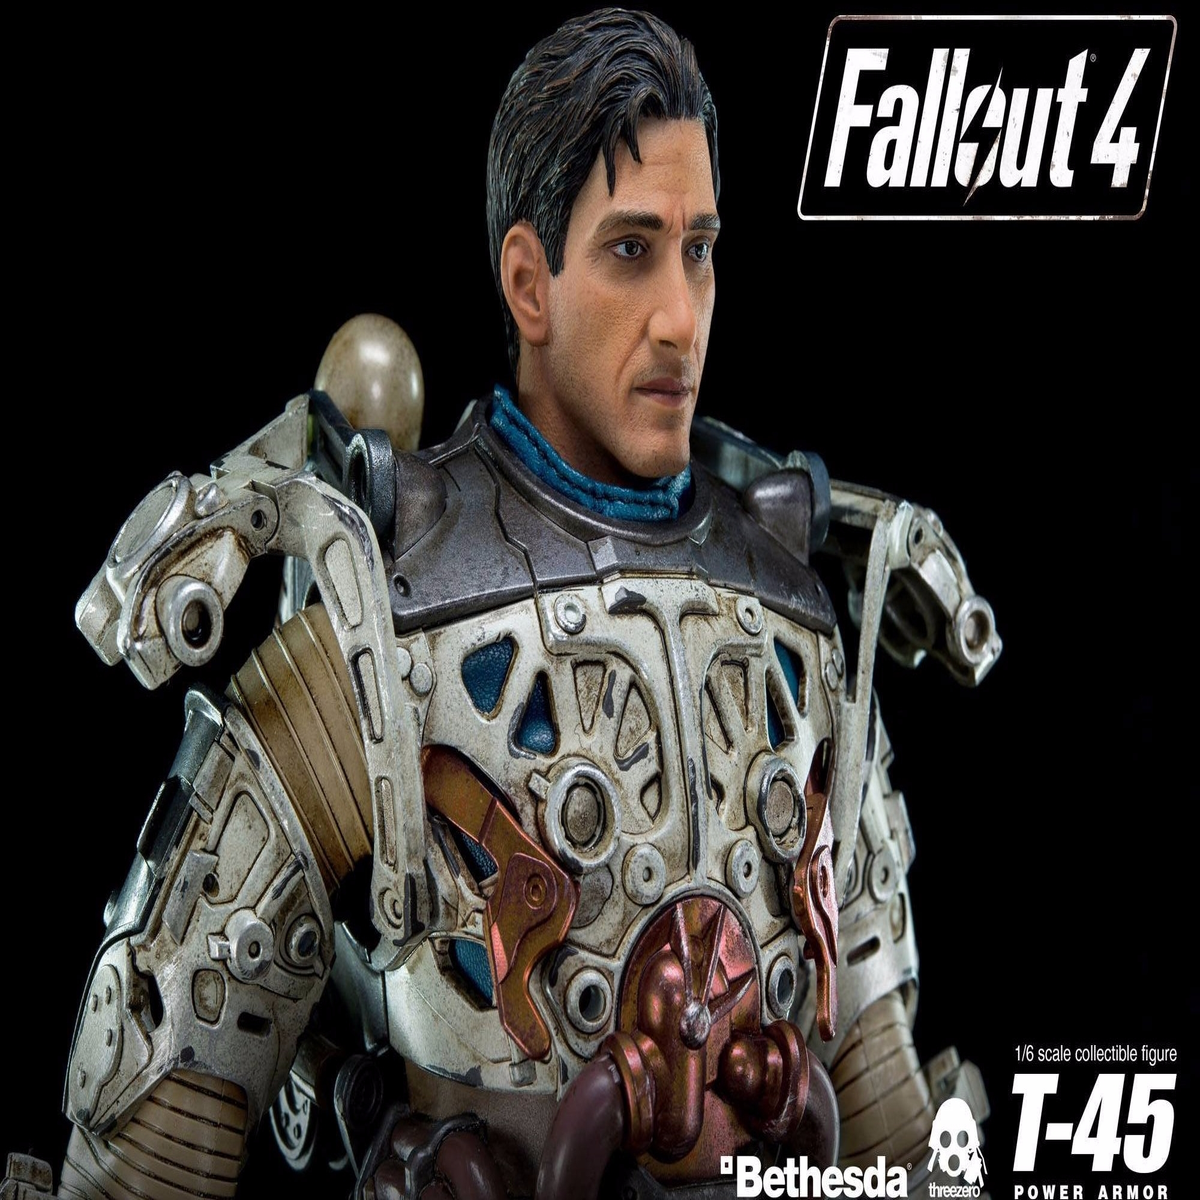 mikro to uger FALSK Fallout 4 14.5 inch power armour figurine costs £279 | Eurogamer.net